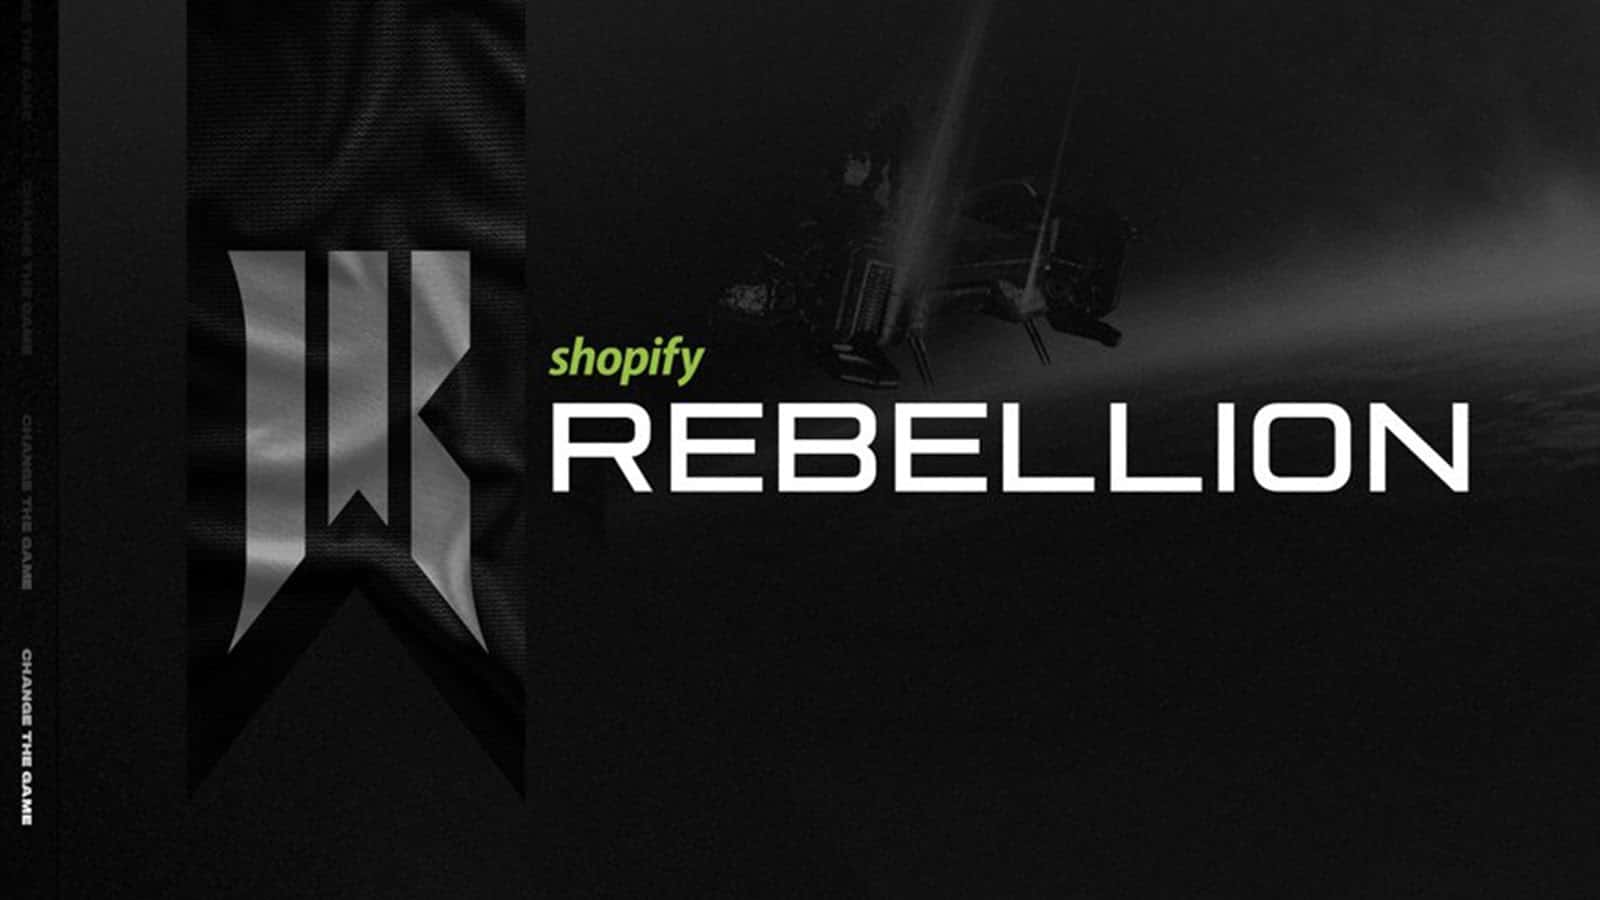 StarCraft: Shopify Enters Esports With Shopify Rebellion